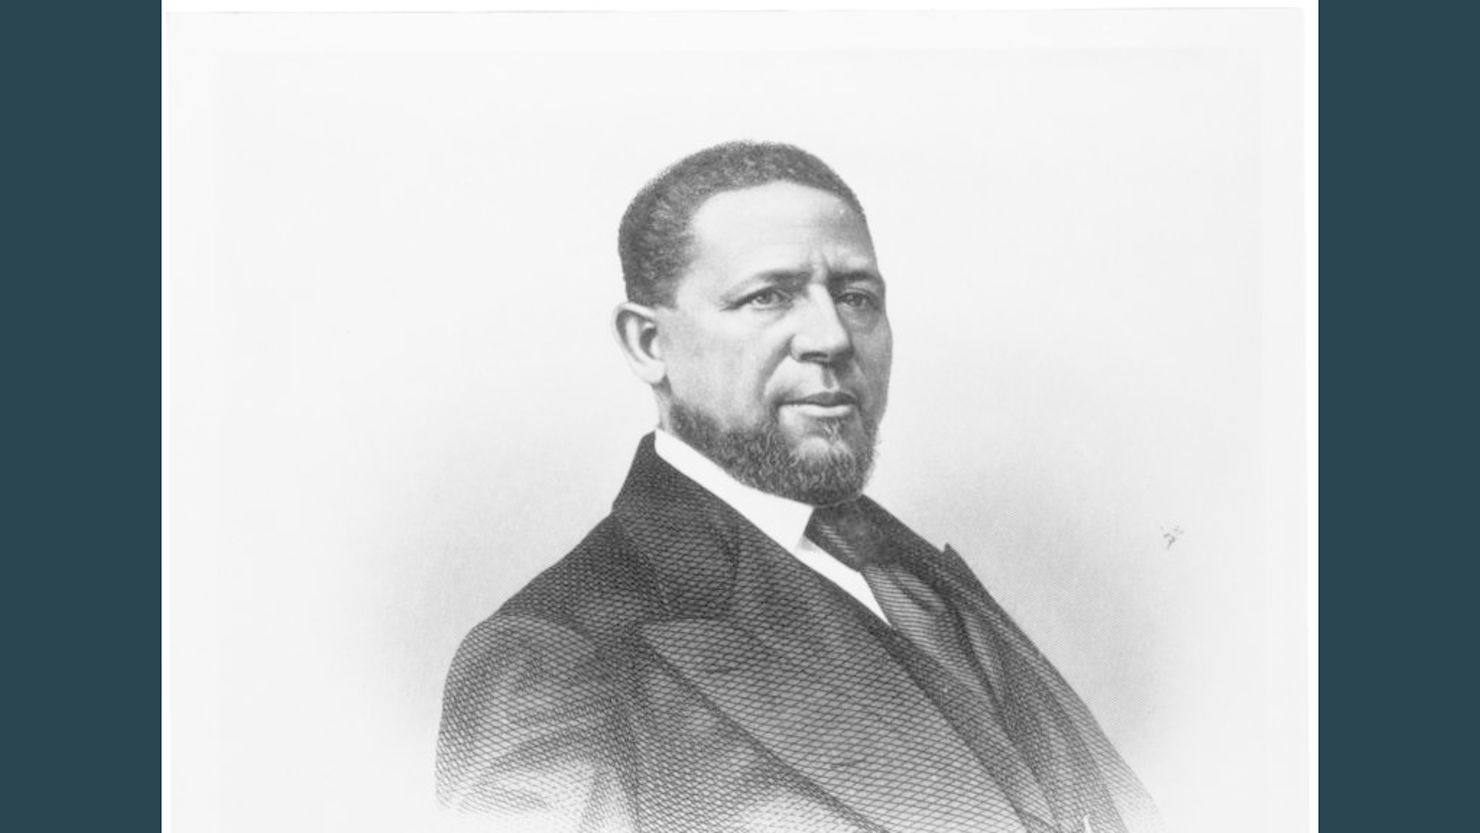 Hiram Rhodes Revels became the first African American elected to the United States Senate in 1870.